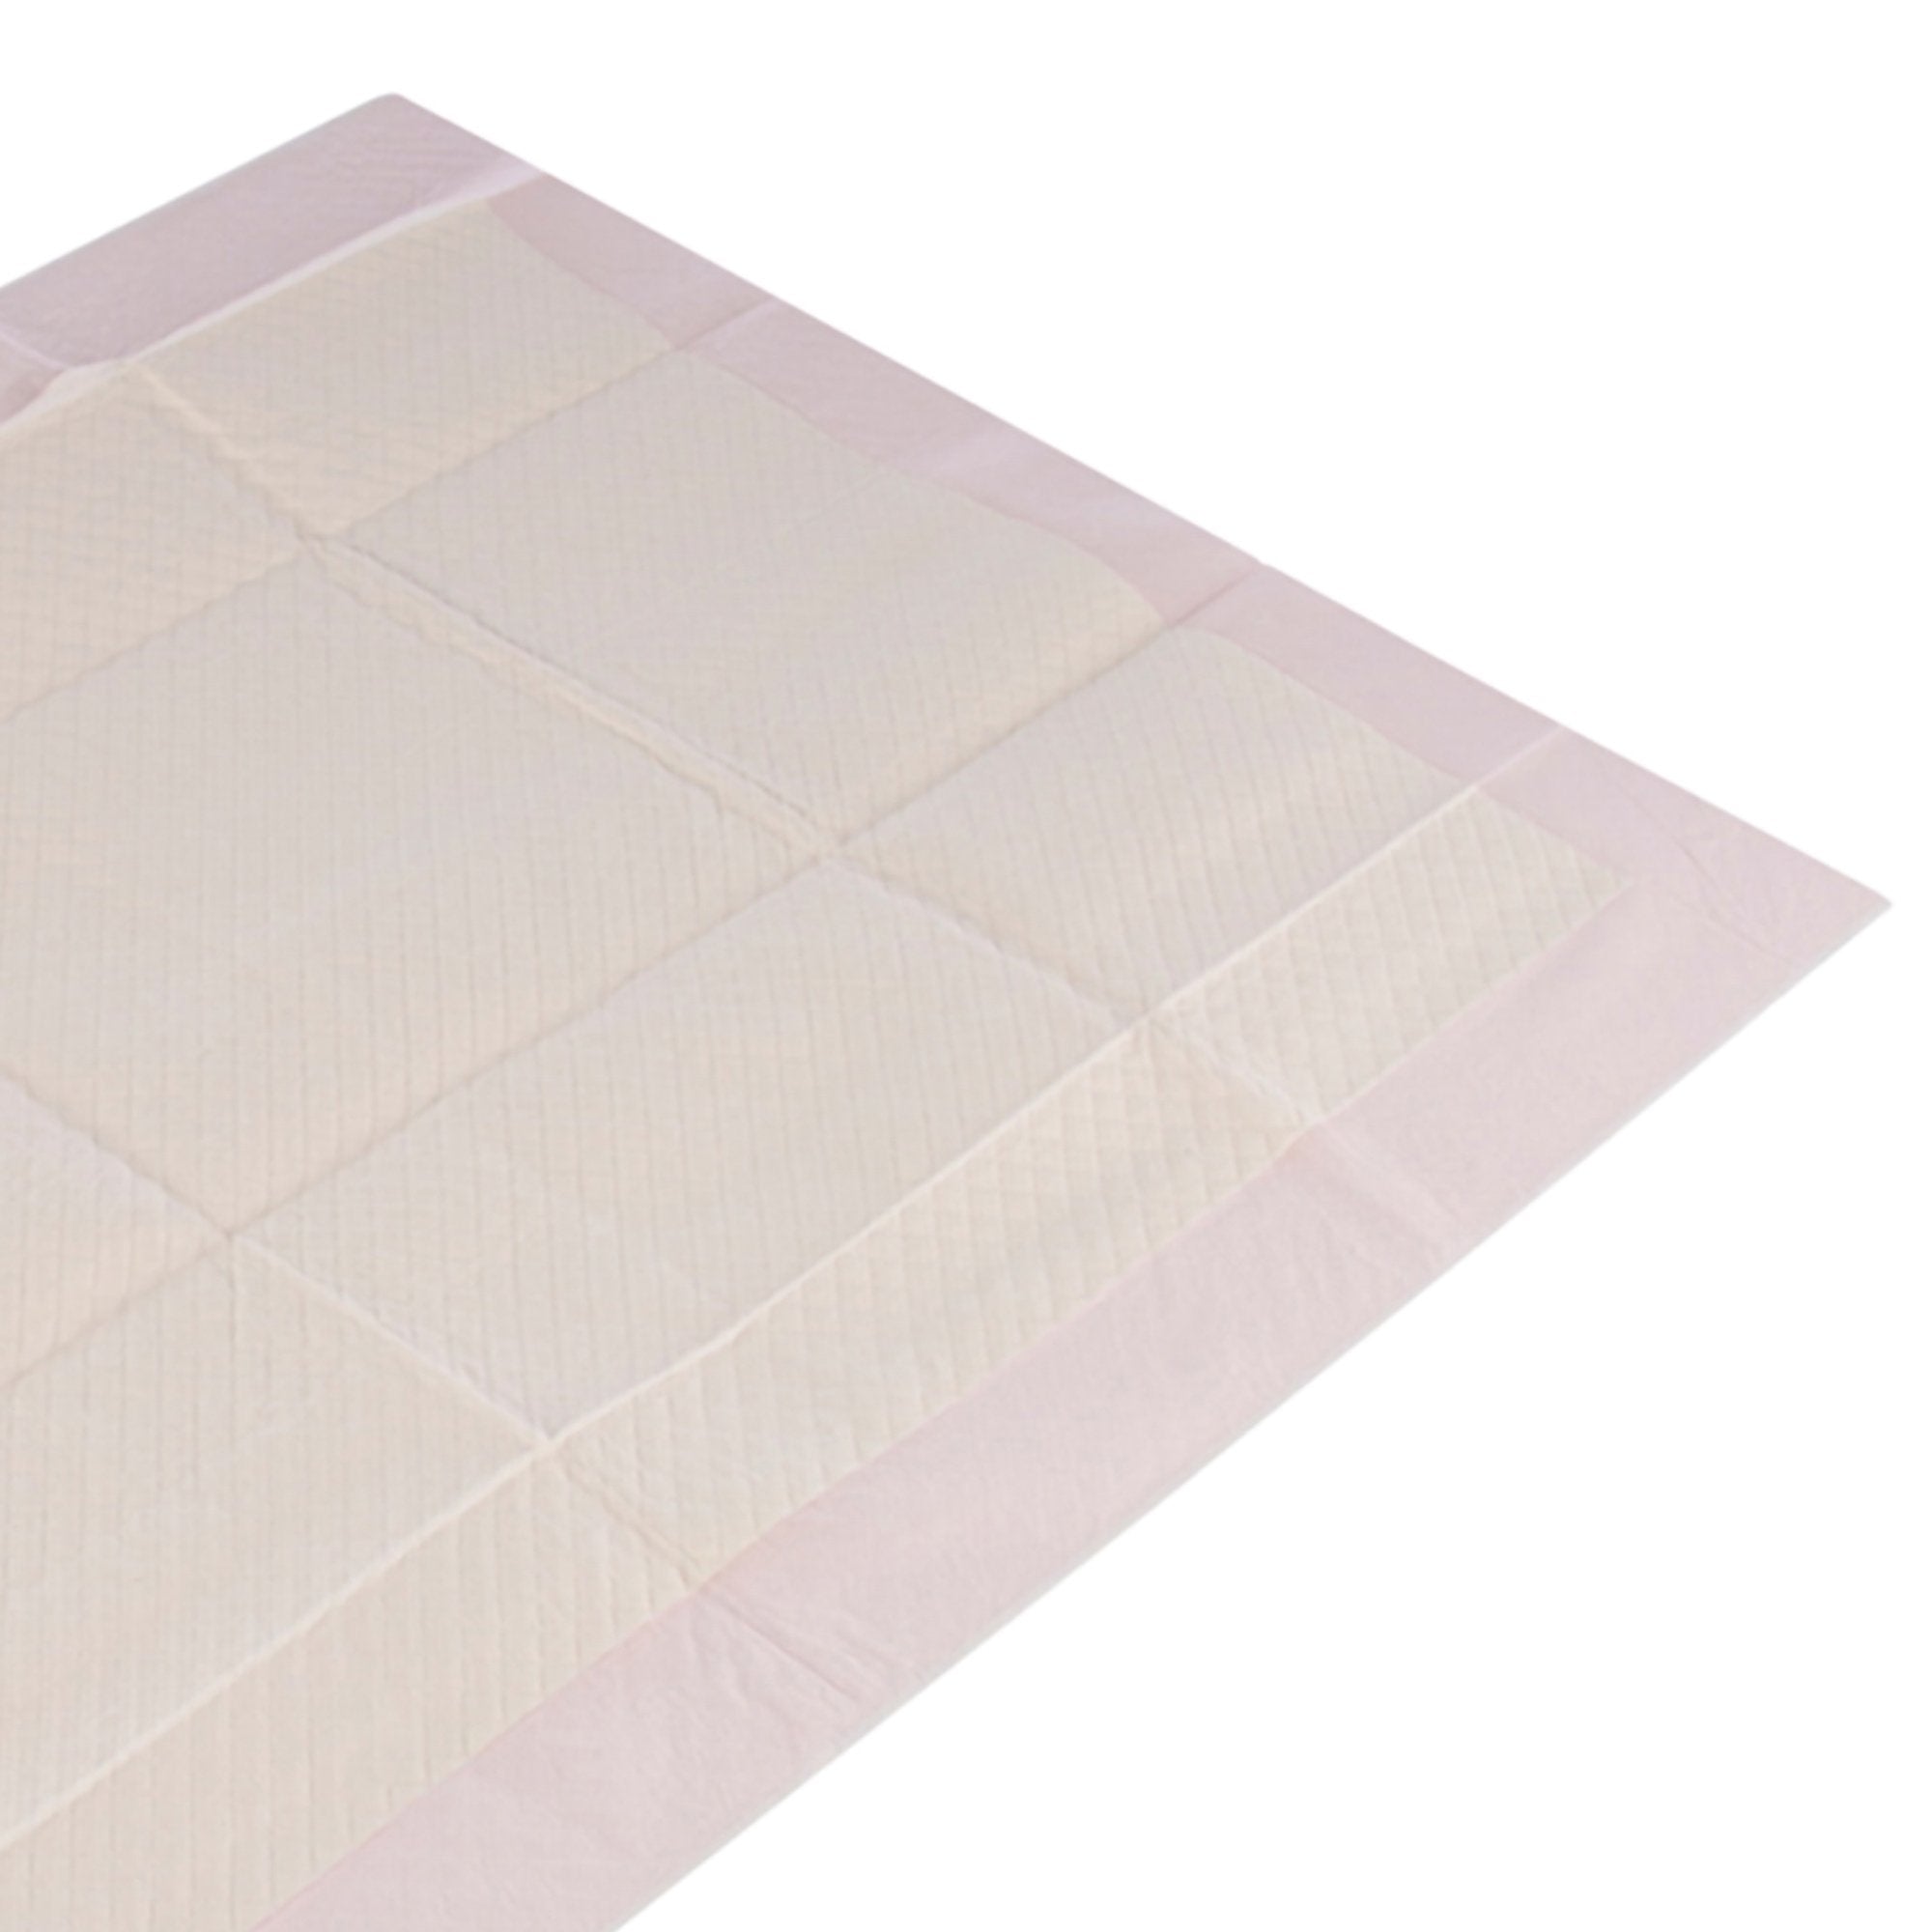 Disposable Underpad Attends® Care Dri-Sorb® Advanced 23 X 36 Inch Cellulose / Polymer Heavy Absorbency